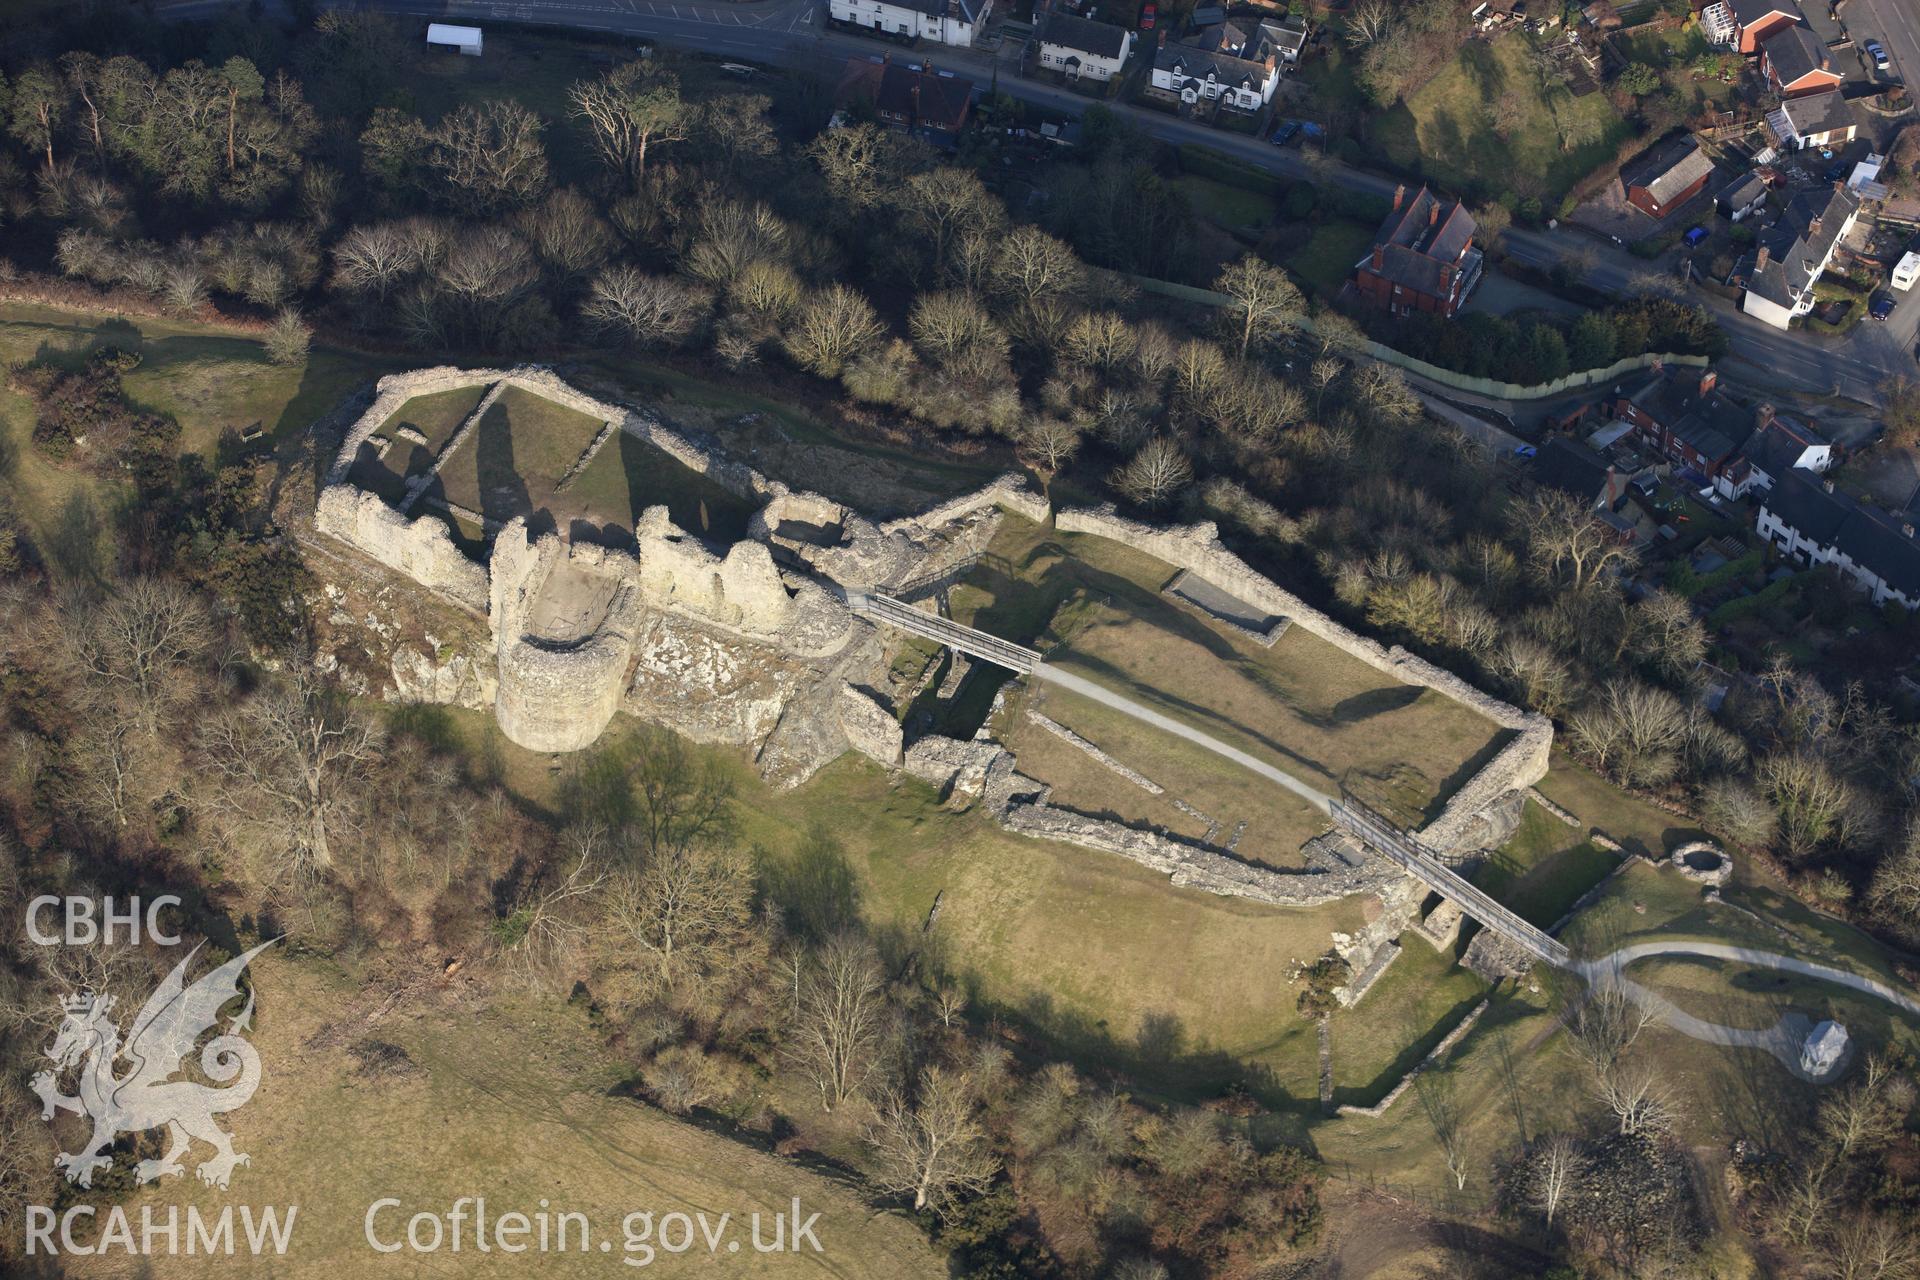 RCAHMW colour oblique photograph of Montgomery Castle. Taken by Toby Driver on 11/03/2010.